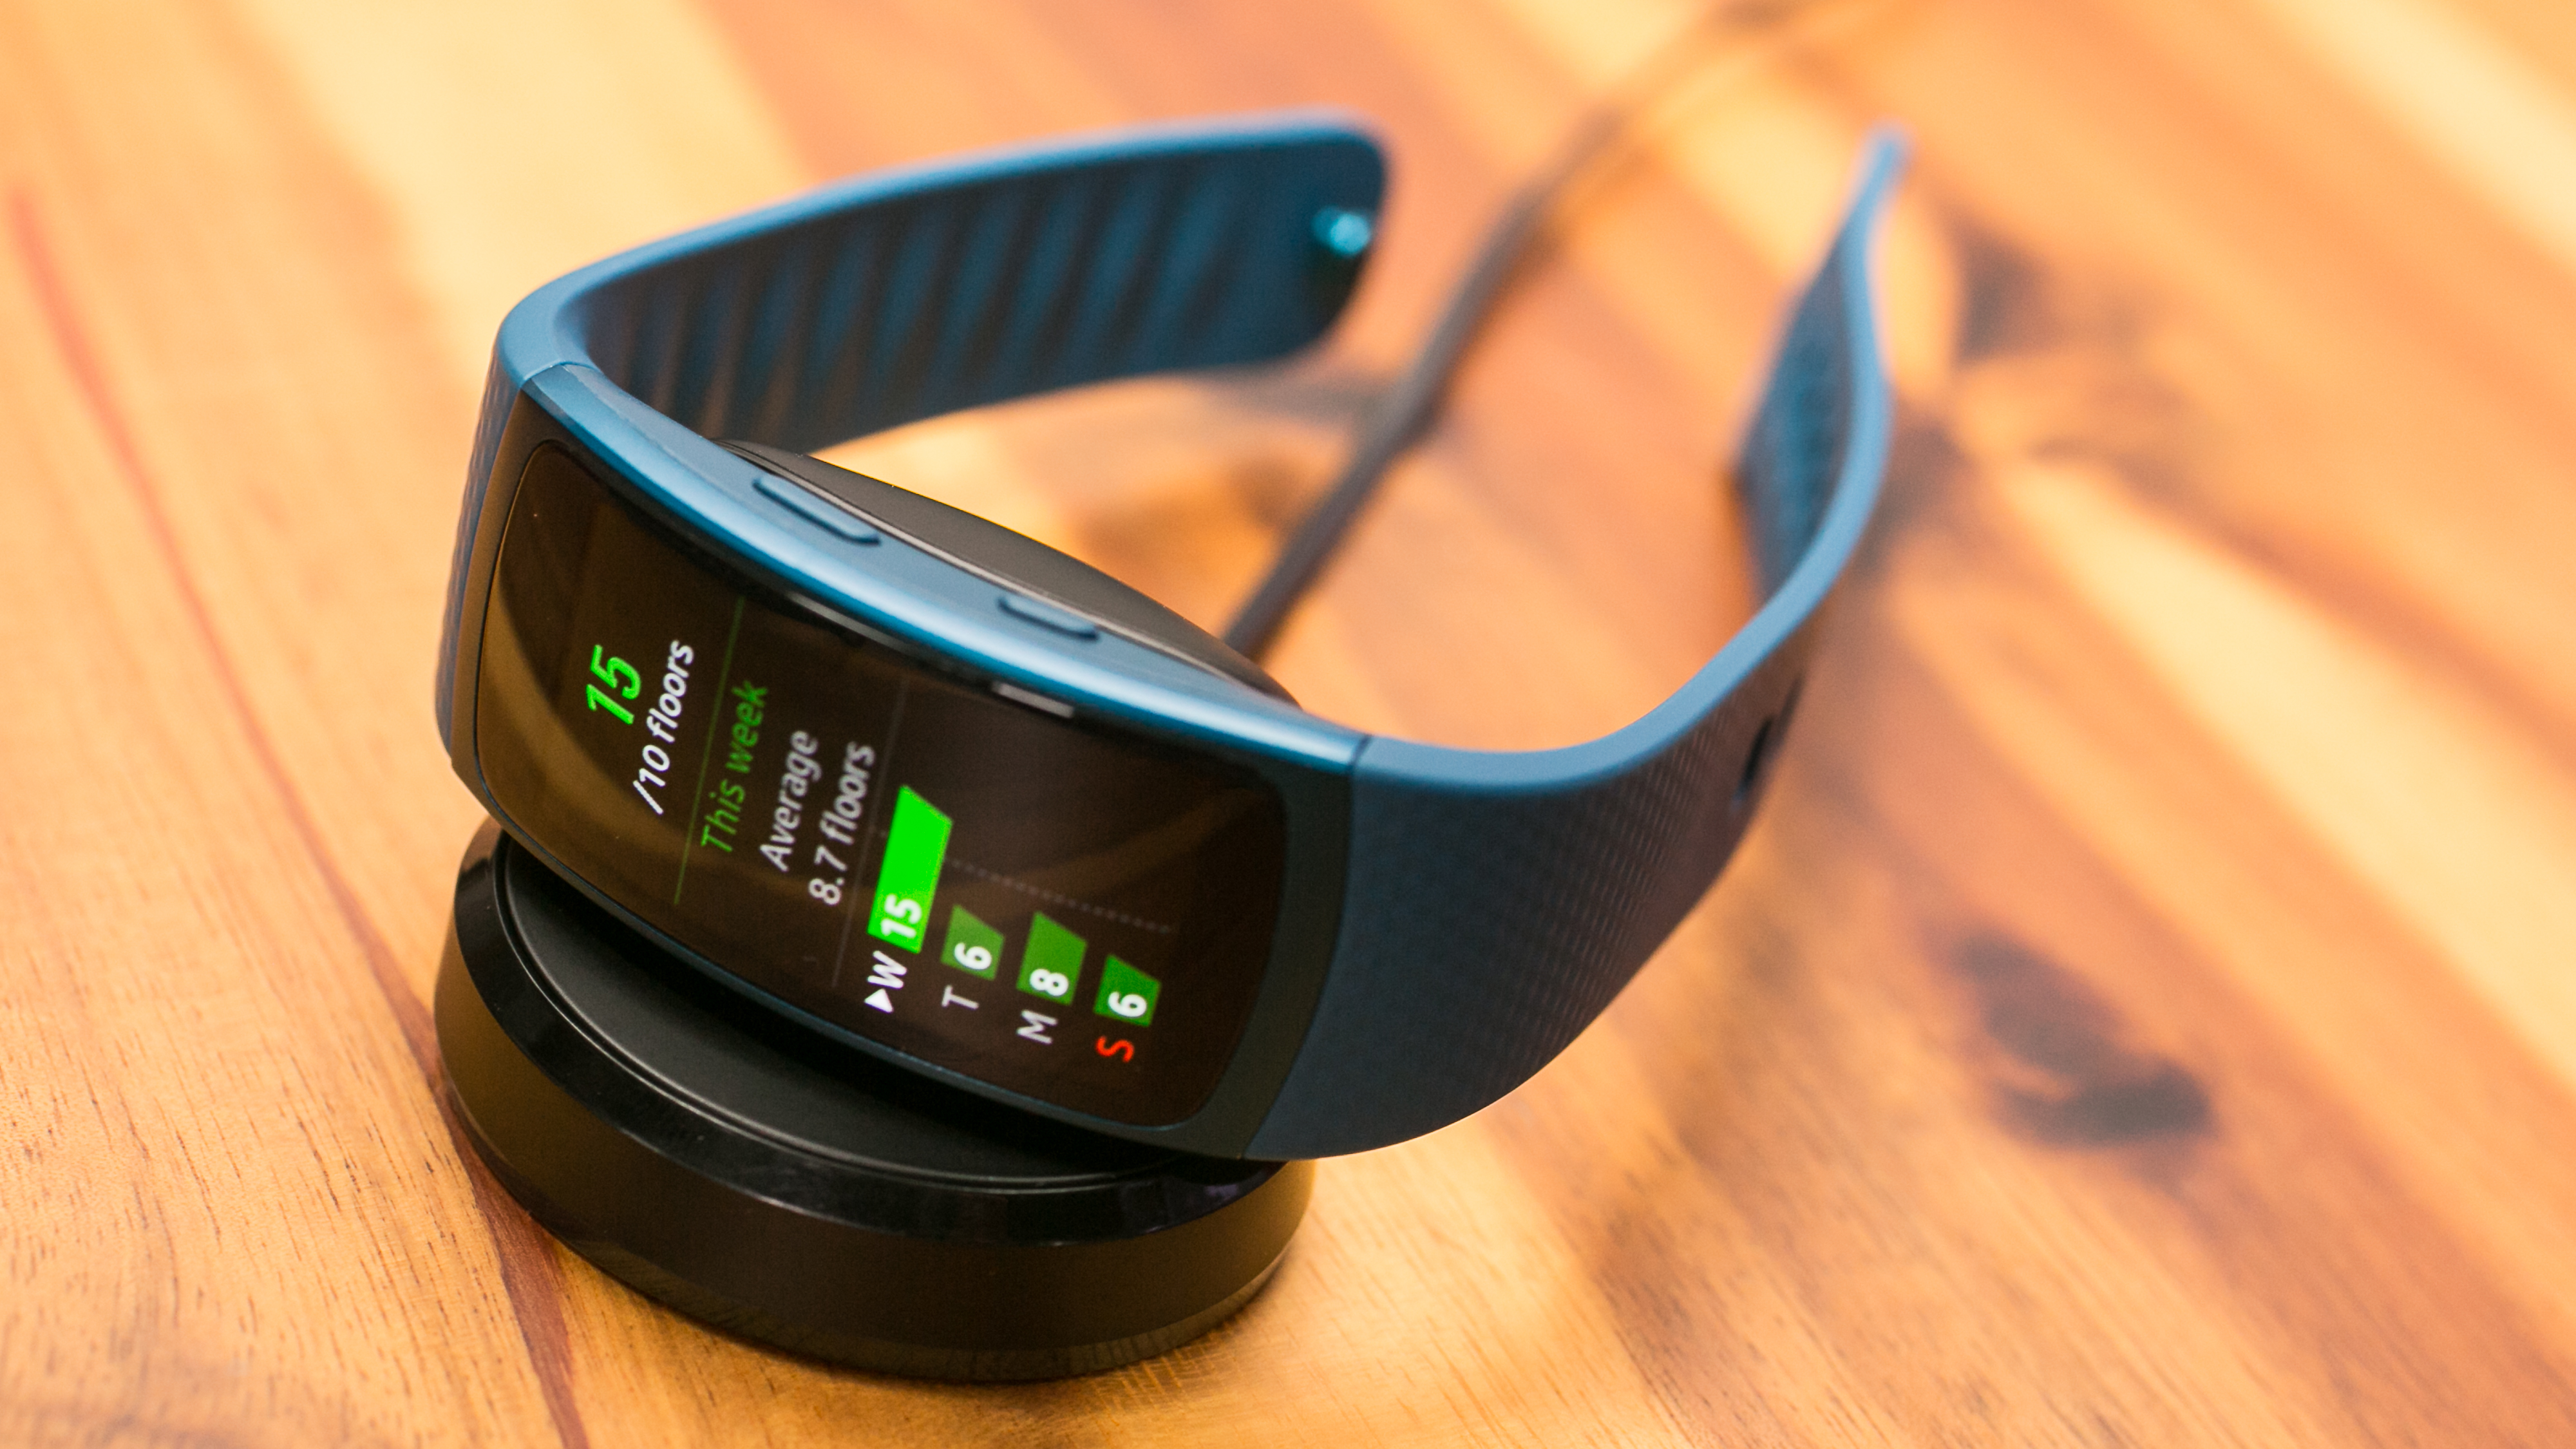 Download Spotify For Gear Fit 2